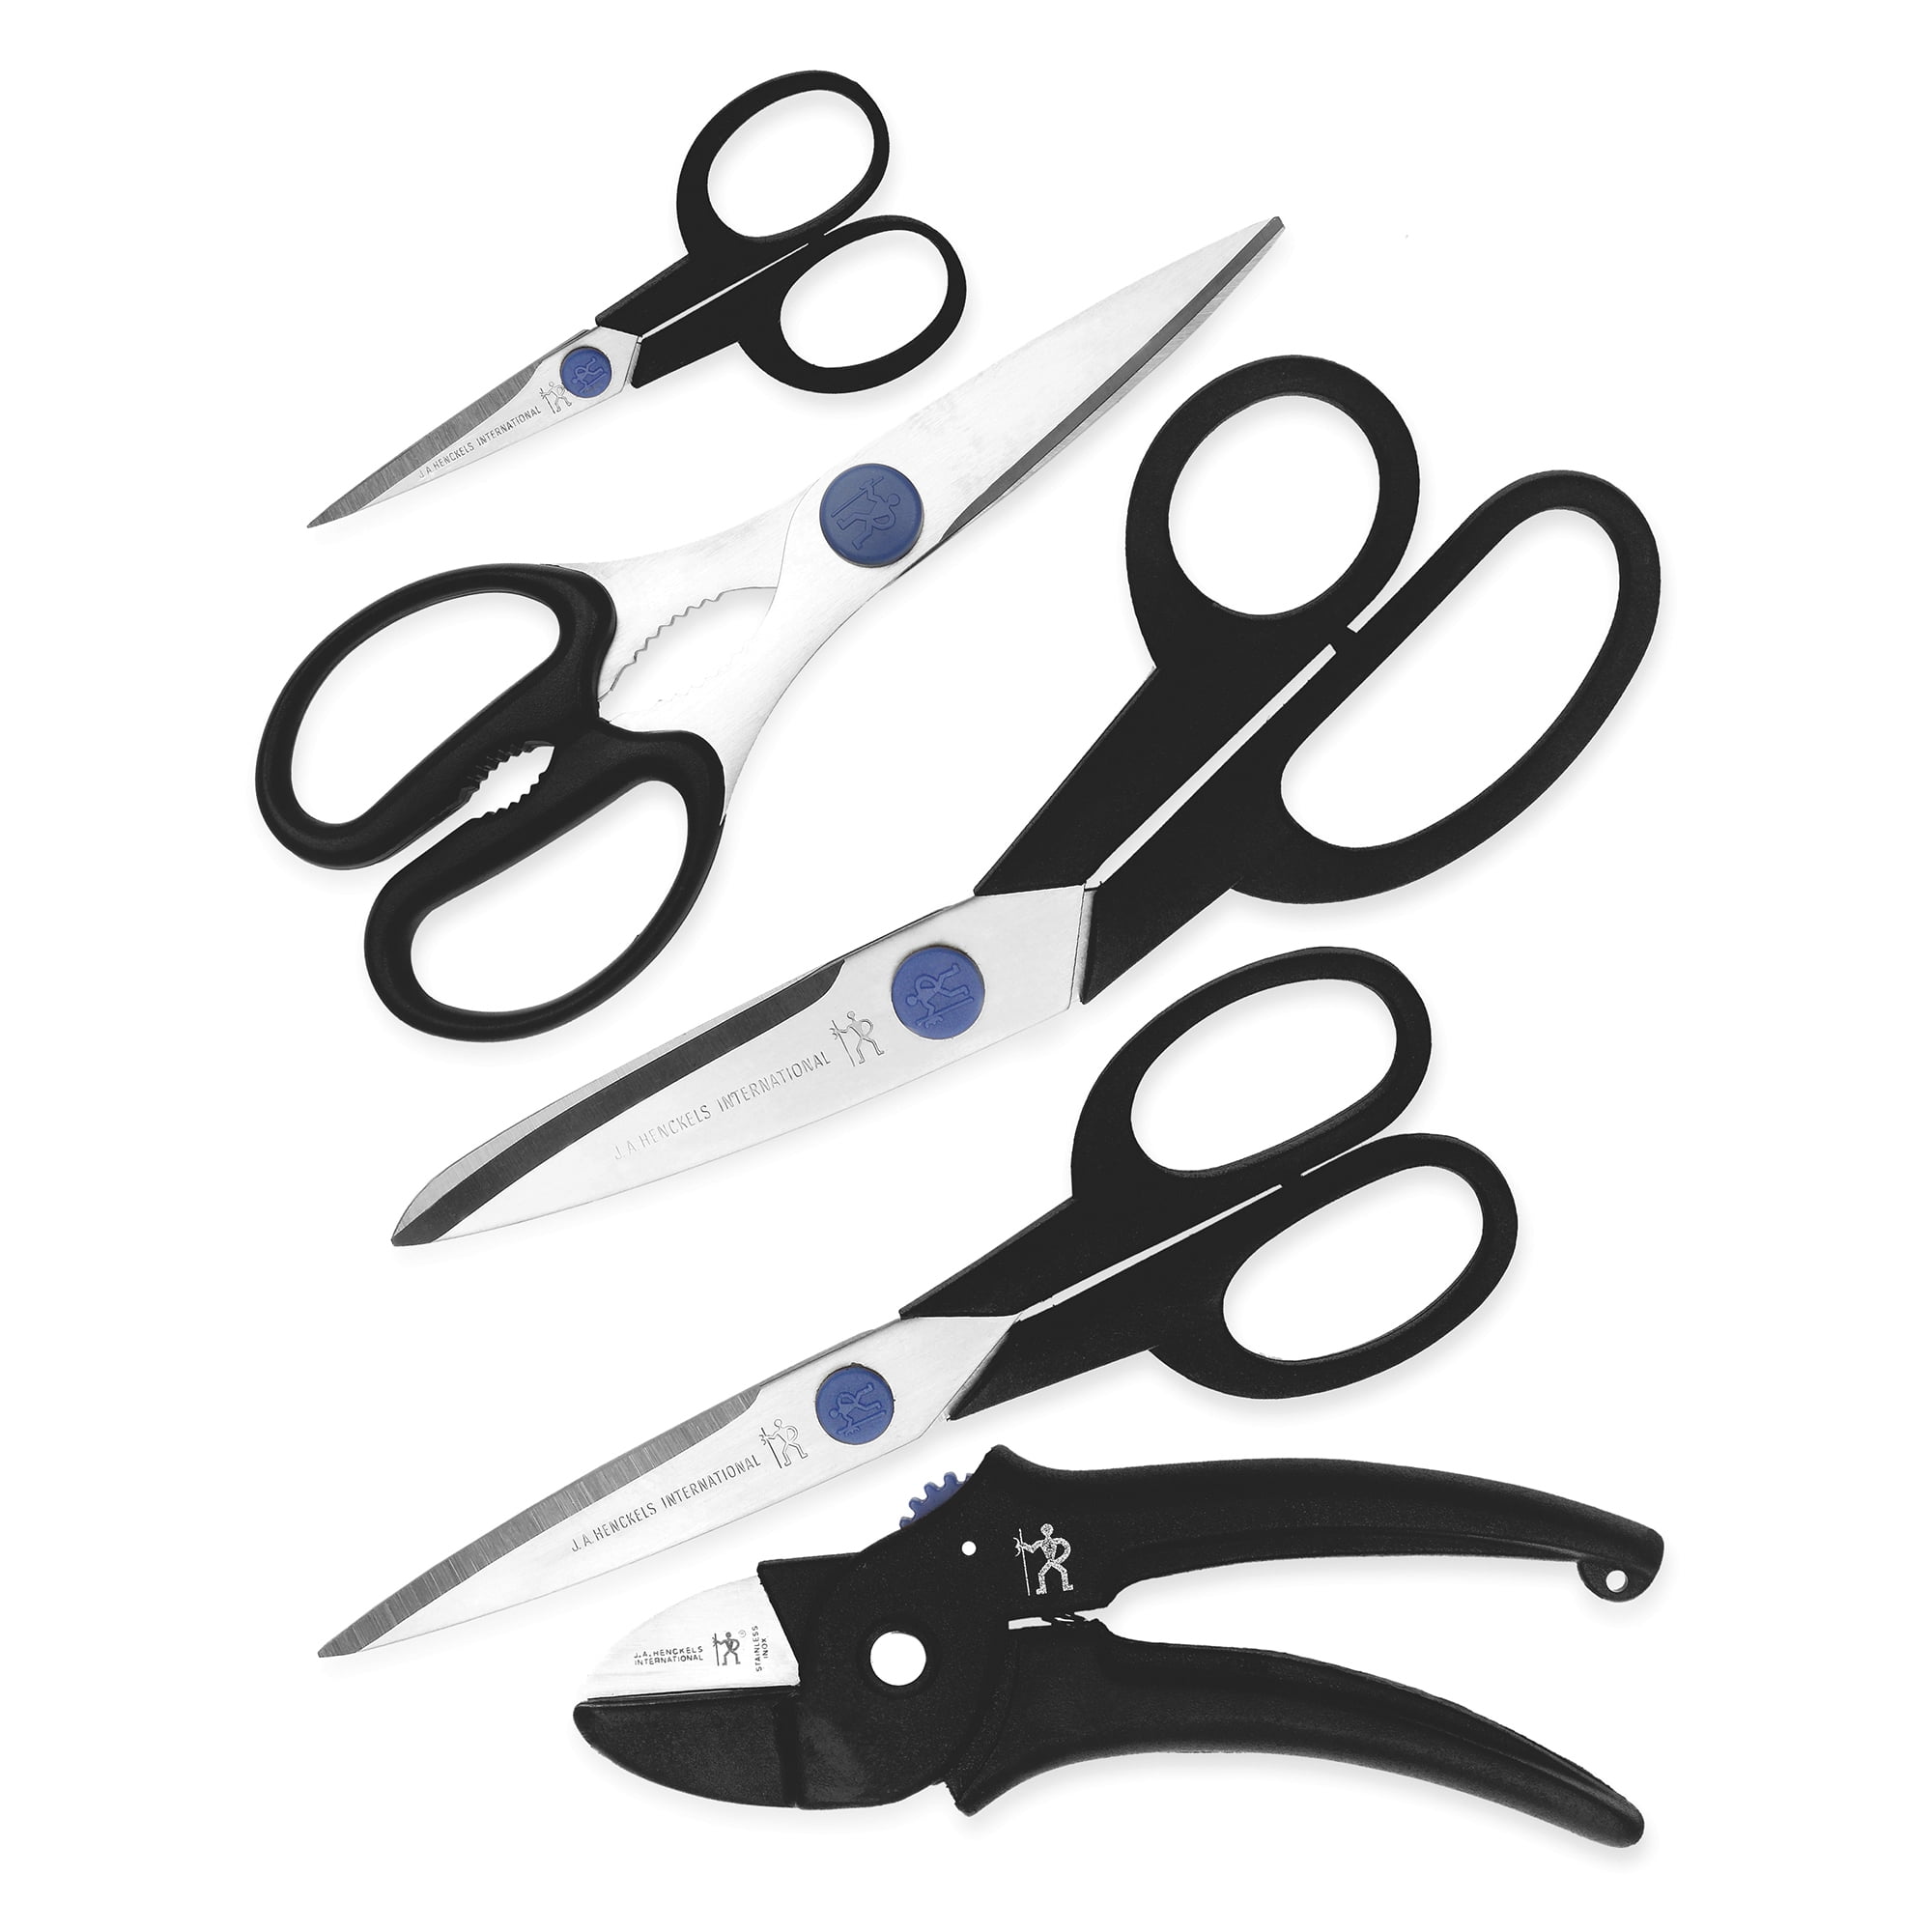  Shun Cutlery 2 Piece Kitchen Shear Set, Stainless Steel Cooking  Scissors, Blades Separate for Easy Cleaning, Comfortable, Non-Slip Handle, Kitchen  Shears Heavy Duty: Home & Kitchen